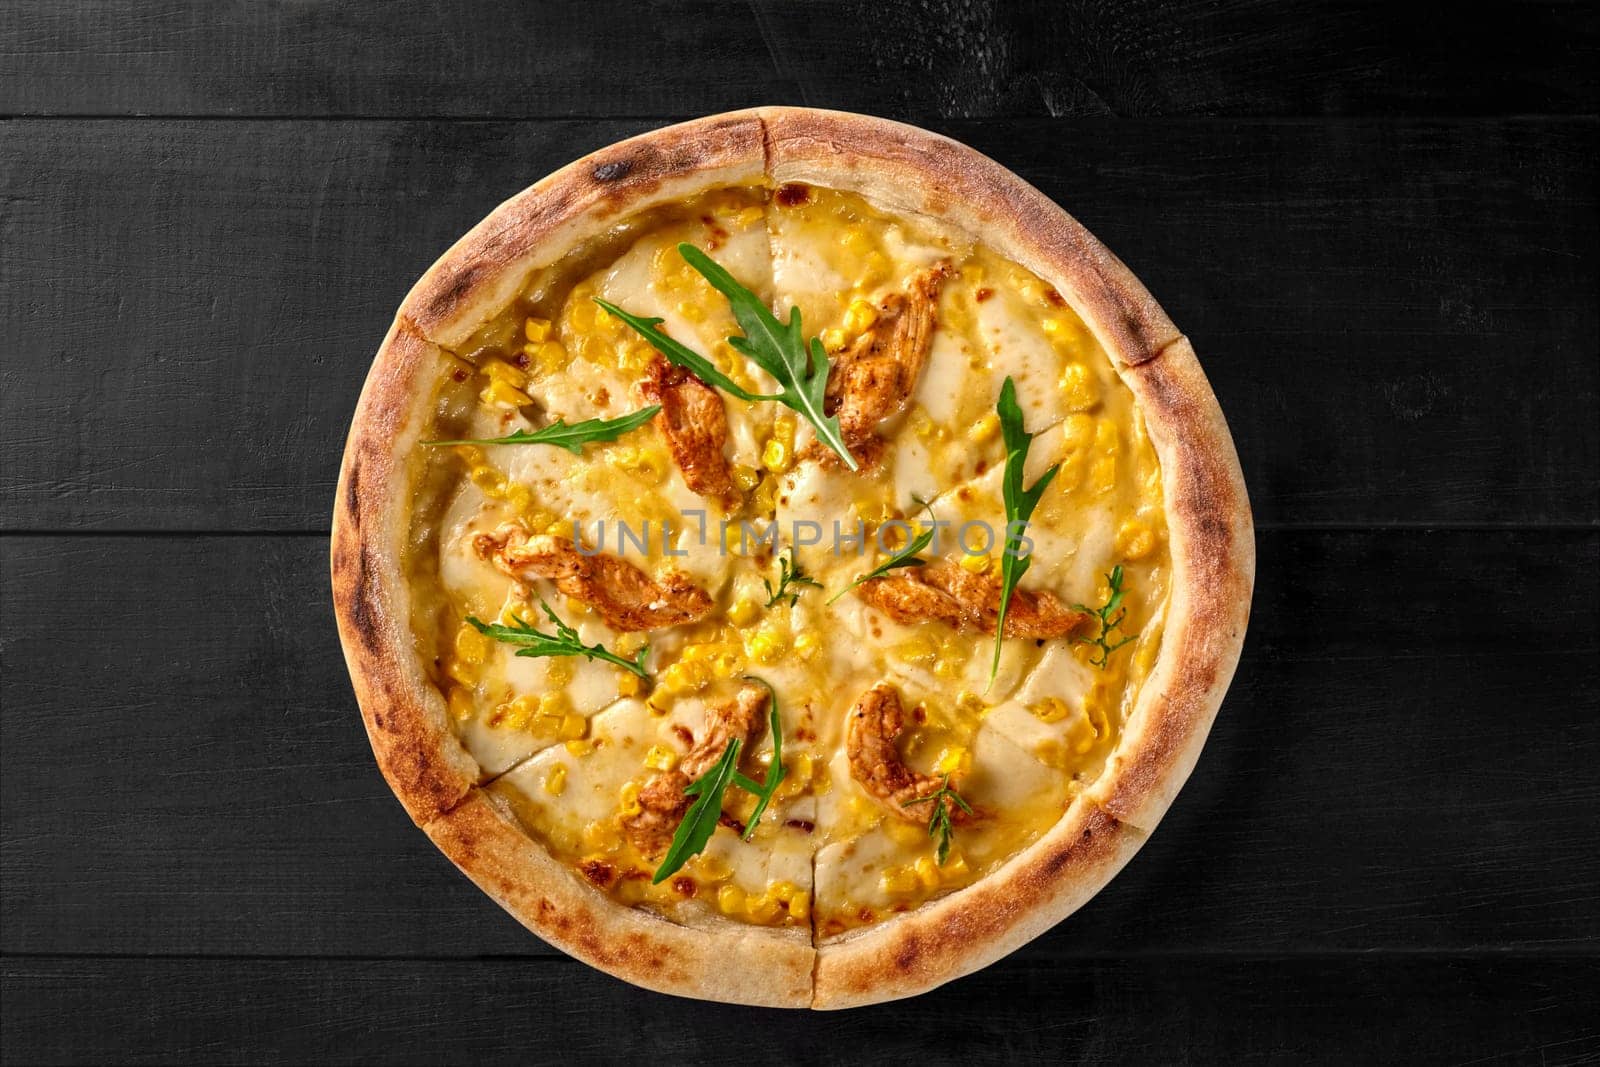 Top view of delicious savory pizza with melted cheese, corn kernels and sous vide chicken filet topped with green arugula on black wooden background